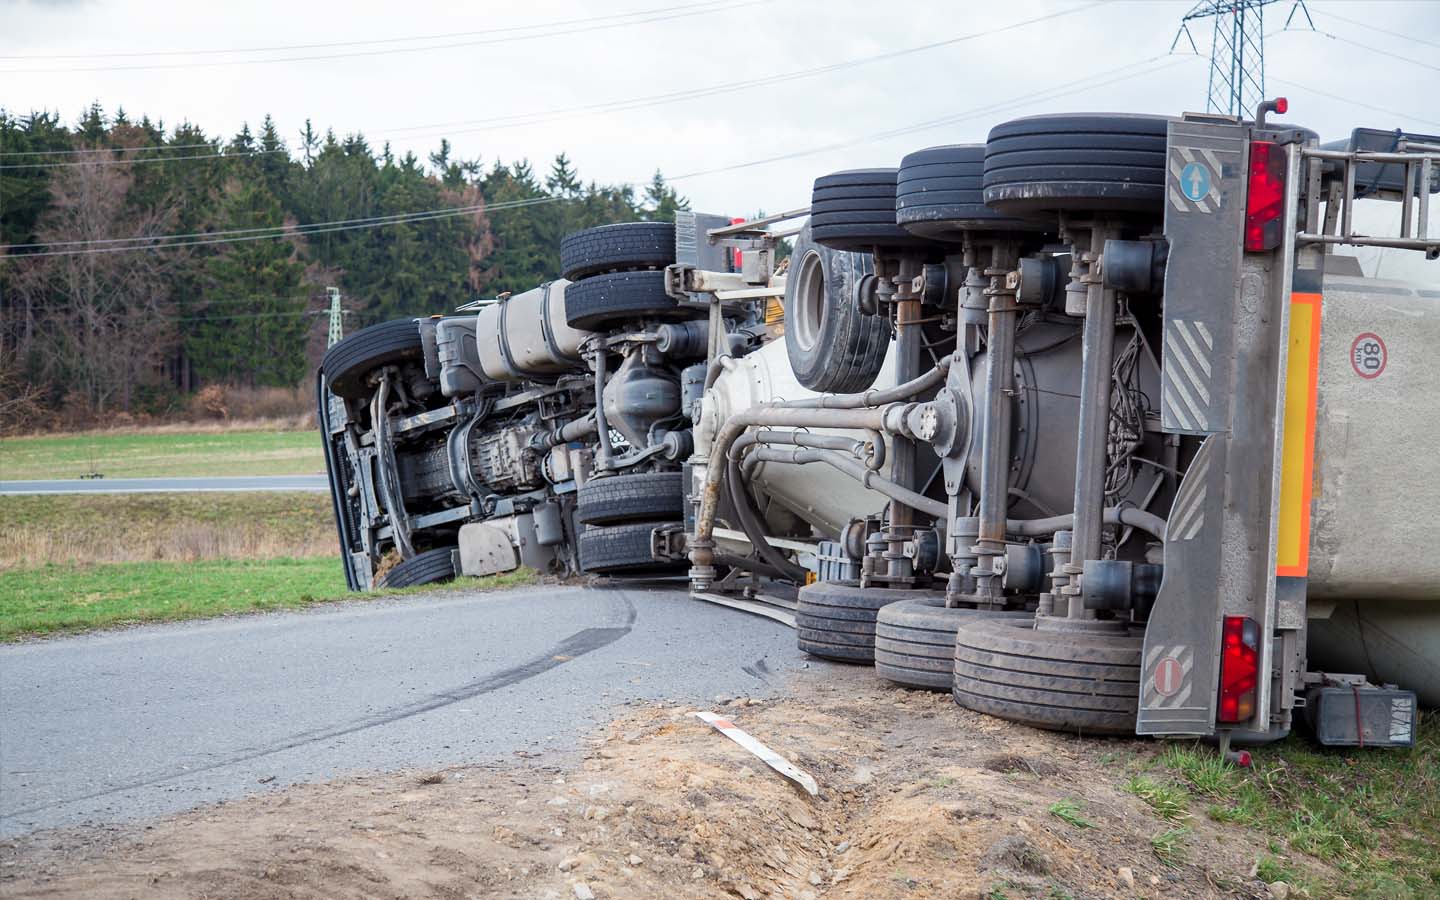 jackknifing can cause severe truck accidents 